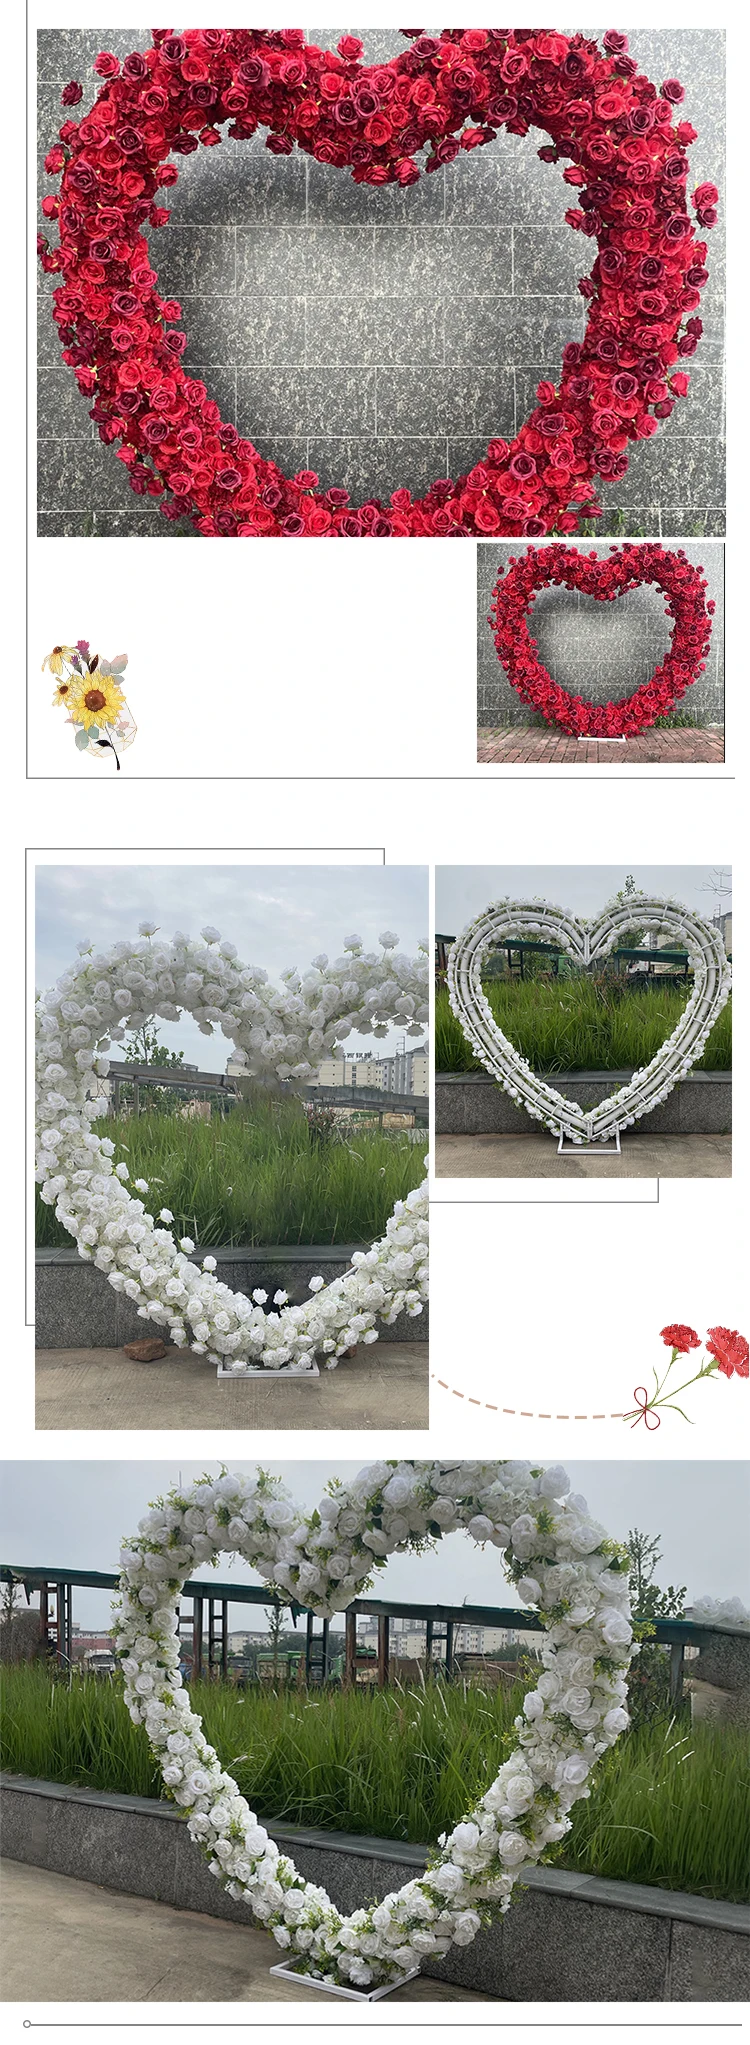 Luxury Red 5D Floral Arrangement With Heart-Shaped Frame